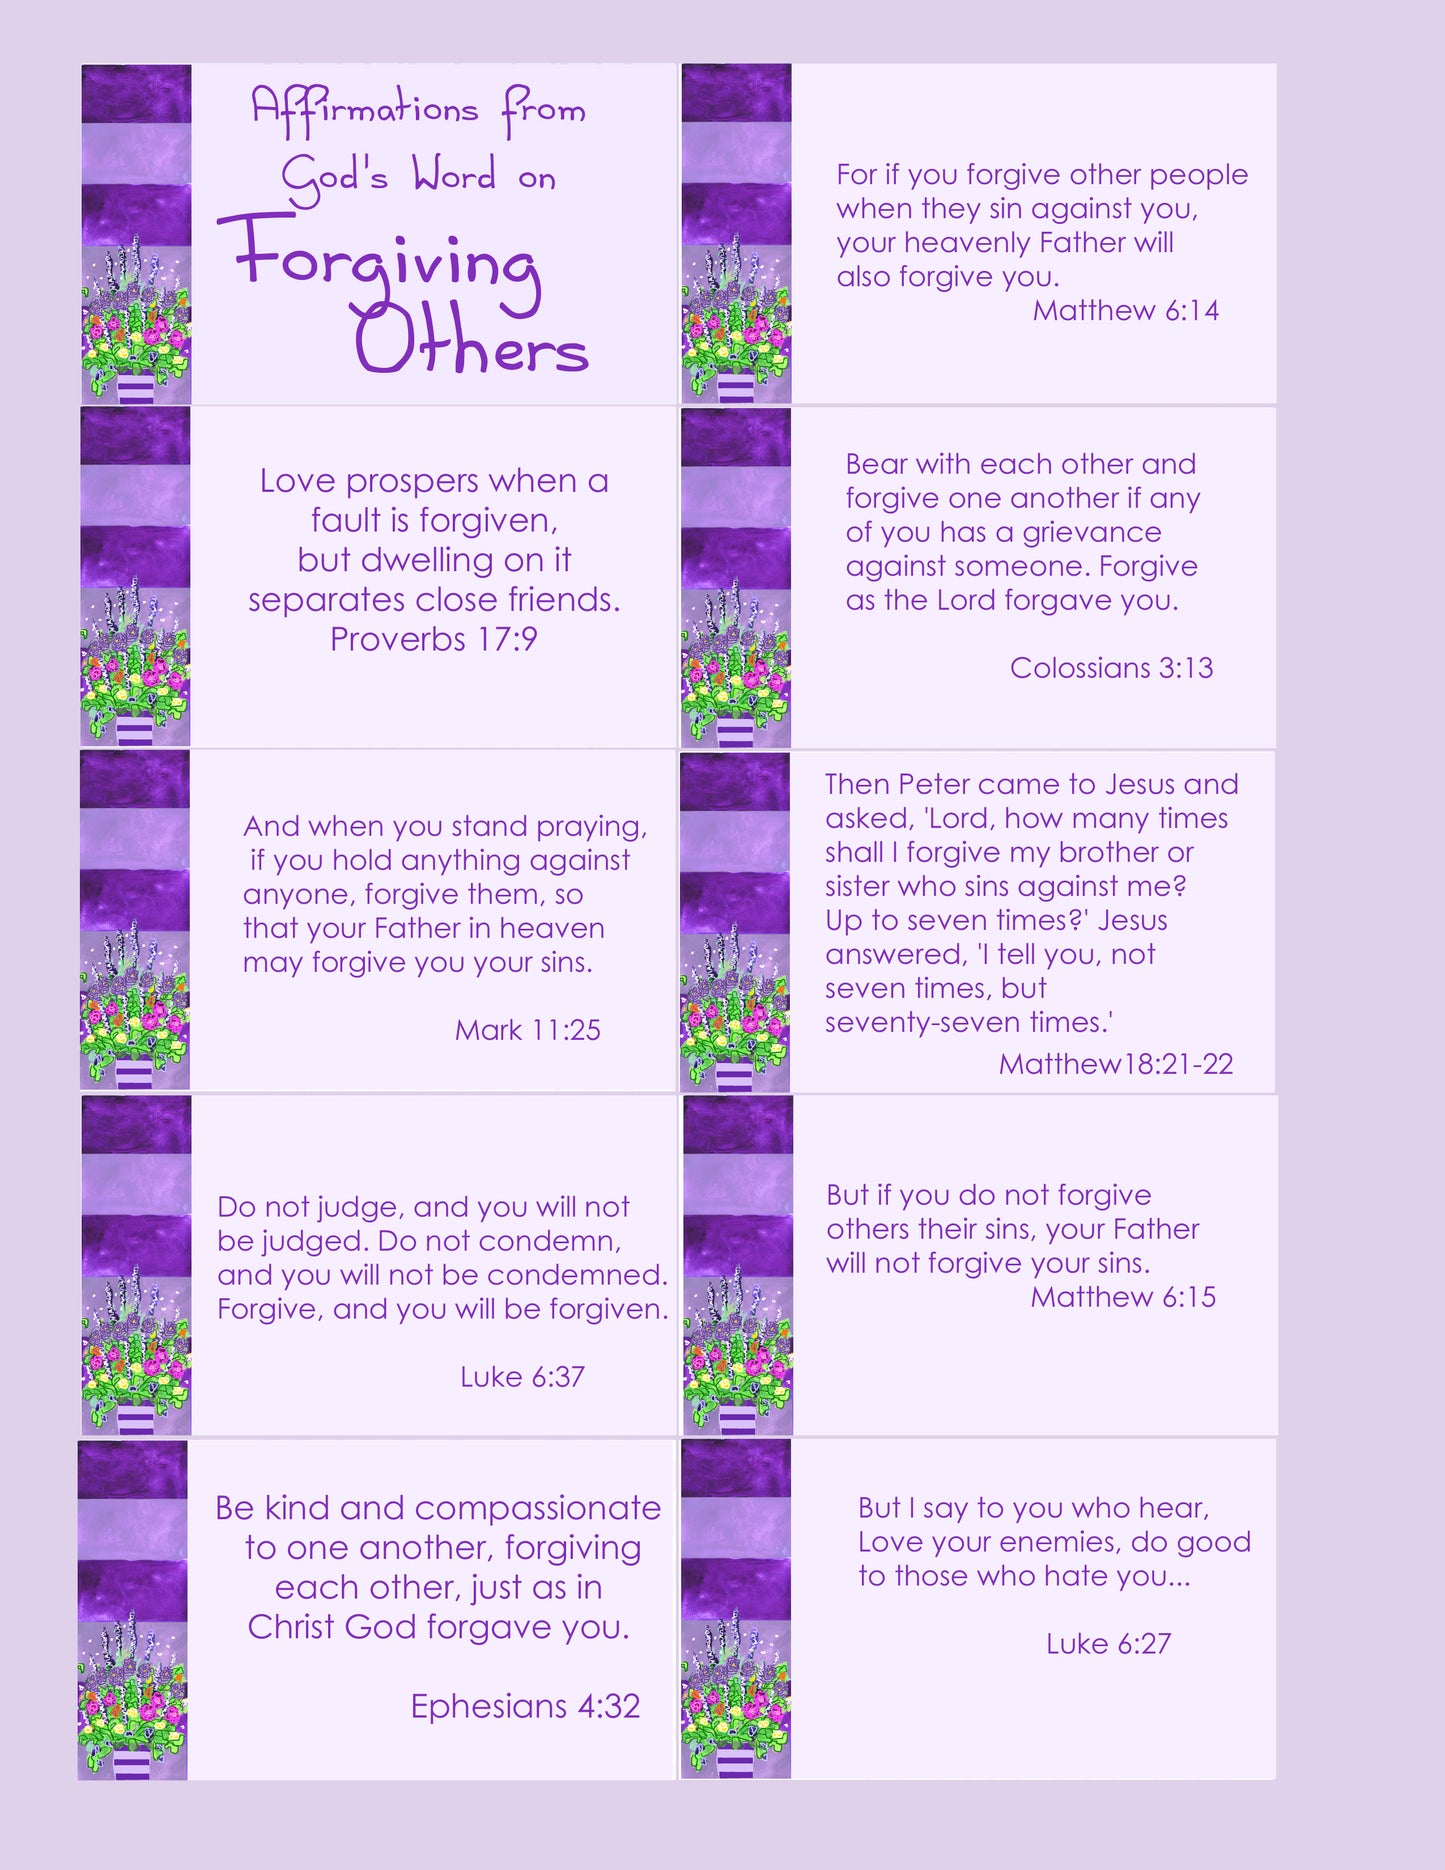 Affirmations from God - Forgiving Others